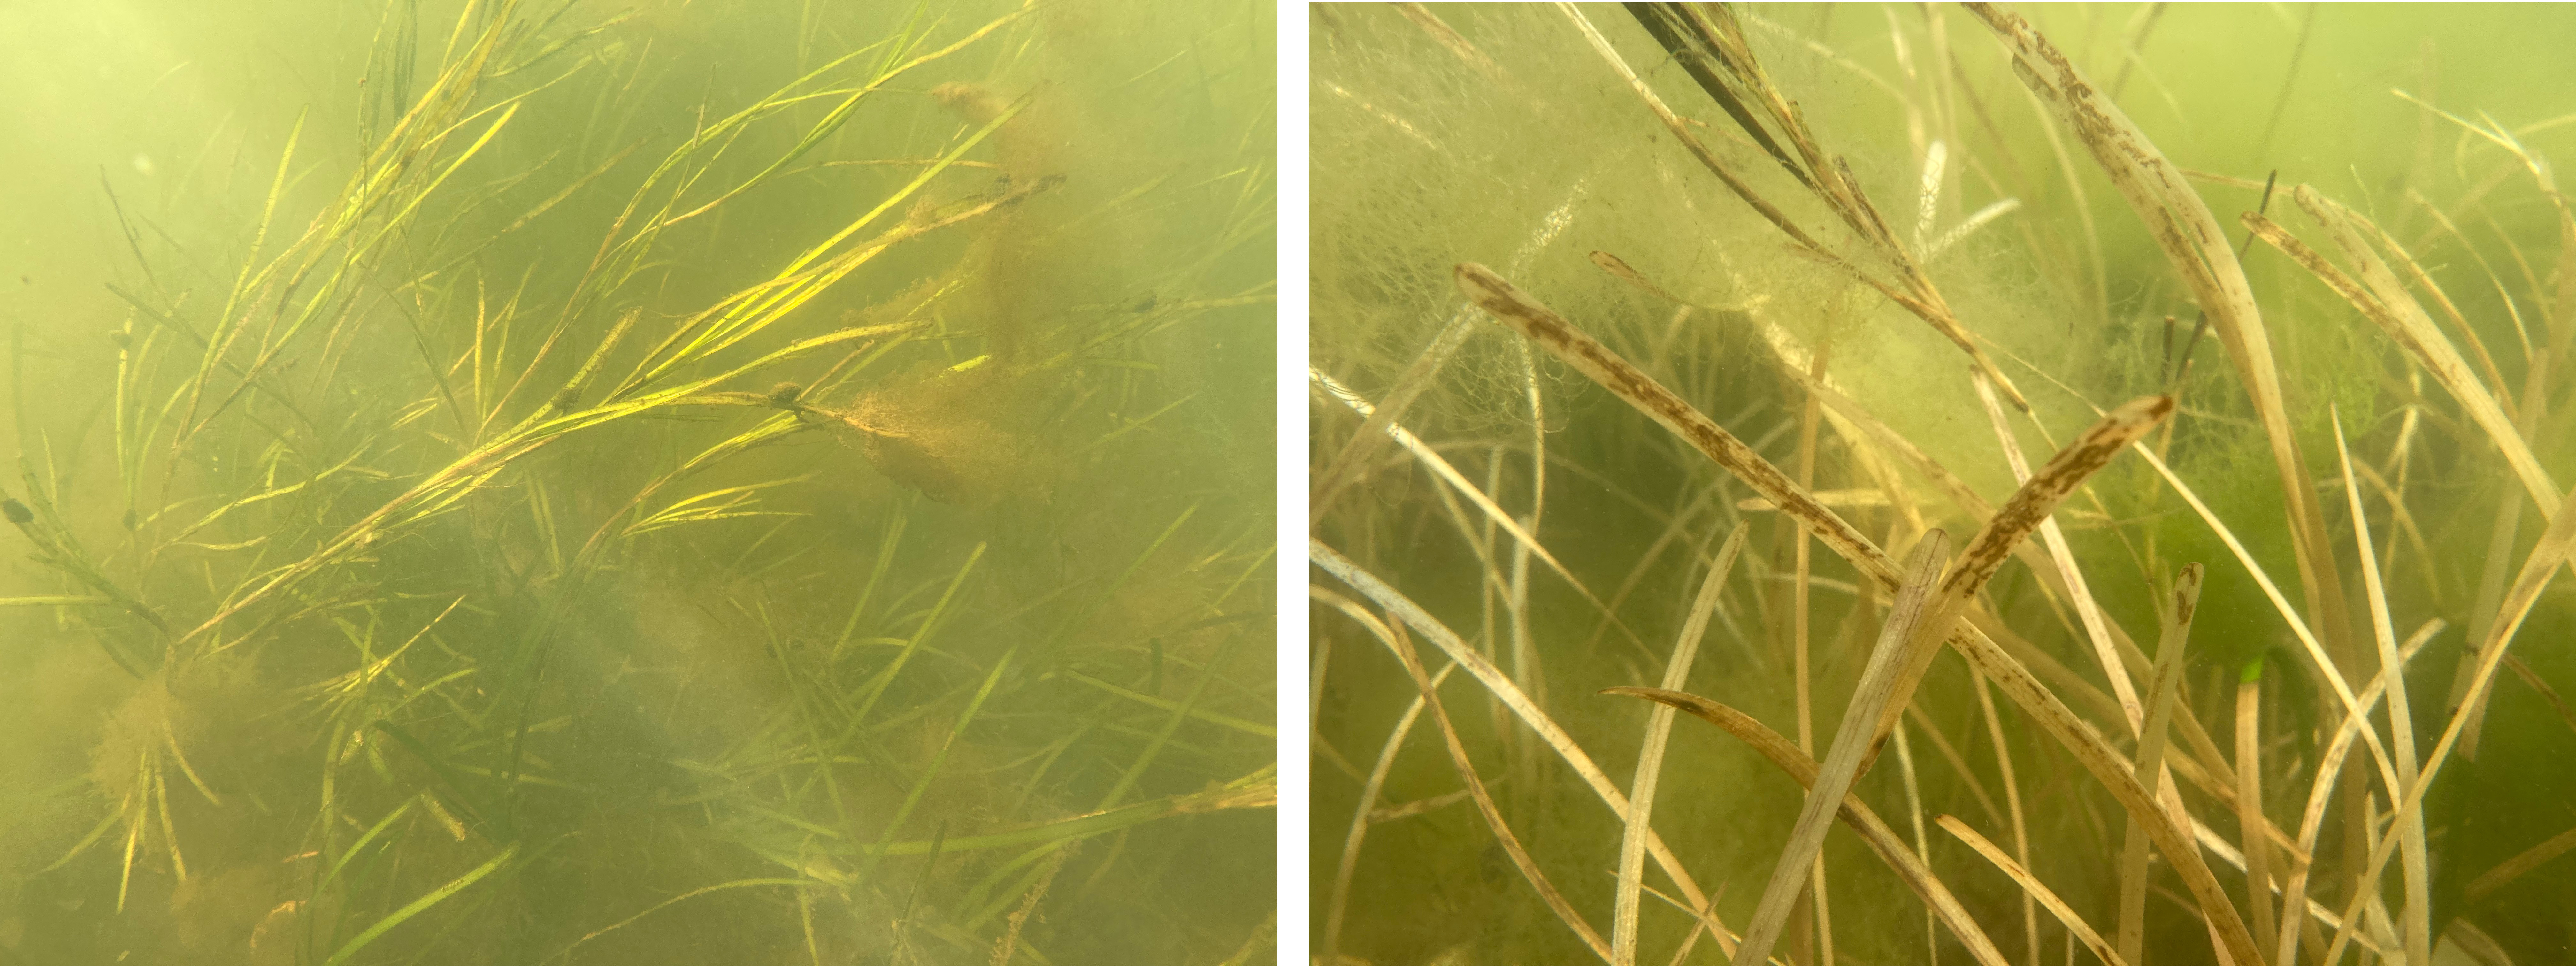 Healthy eelgrass compared to sun-bleached eelgrass